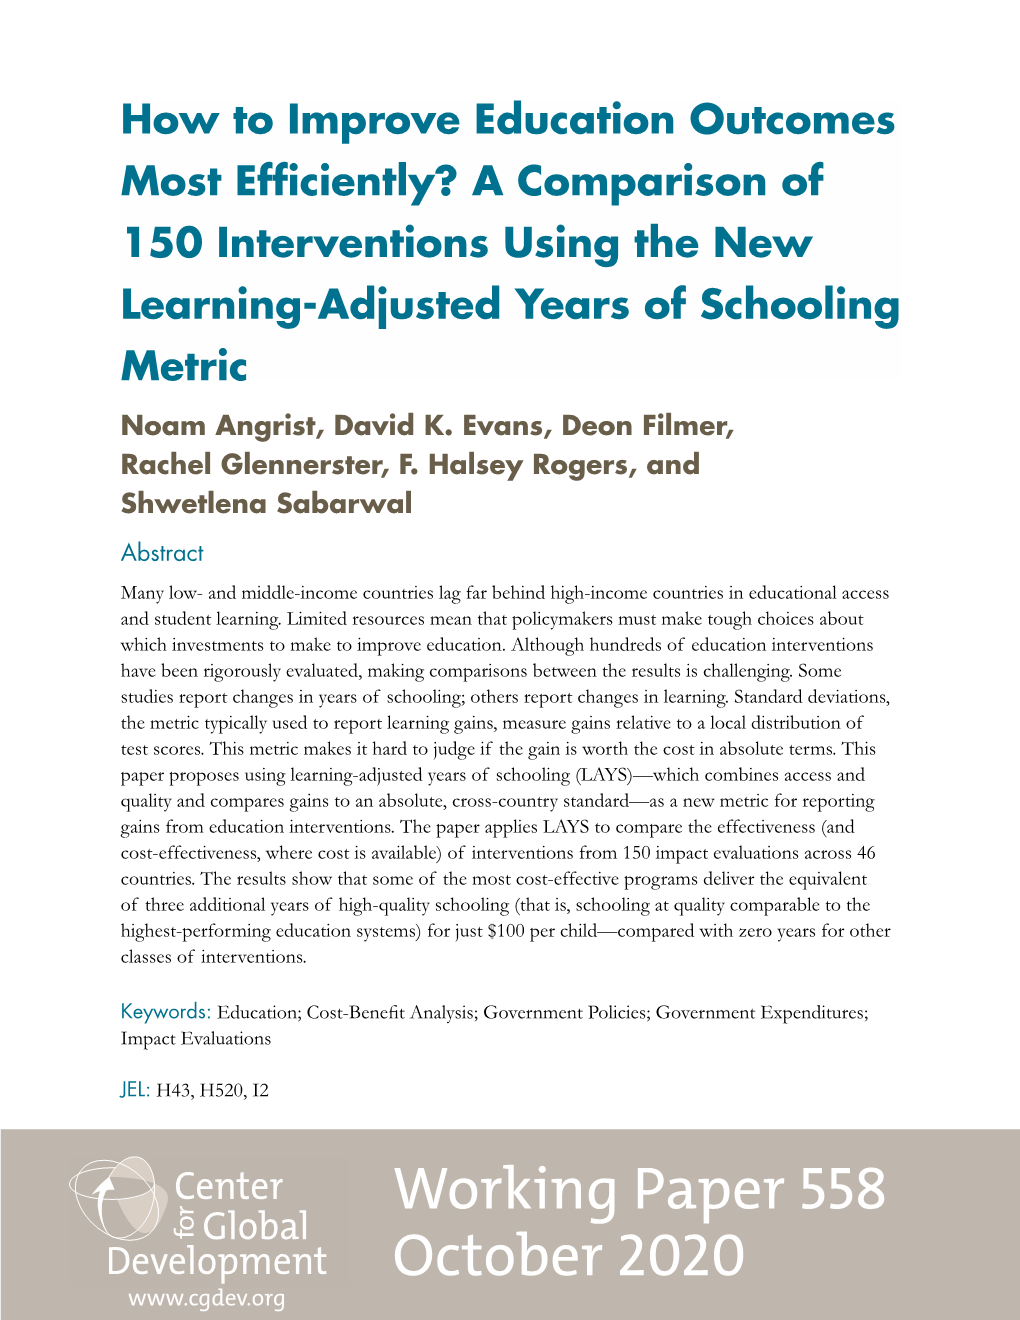 How to Improve Education Outcomes Most Efficiently? a Comparison of 150 Interventions Using the New Learning-Adjusted Years of Schooling Metric Noam Angrist, David K